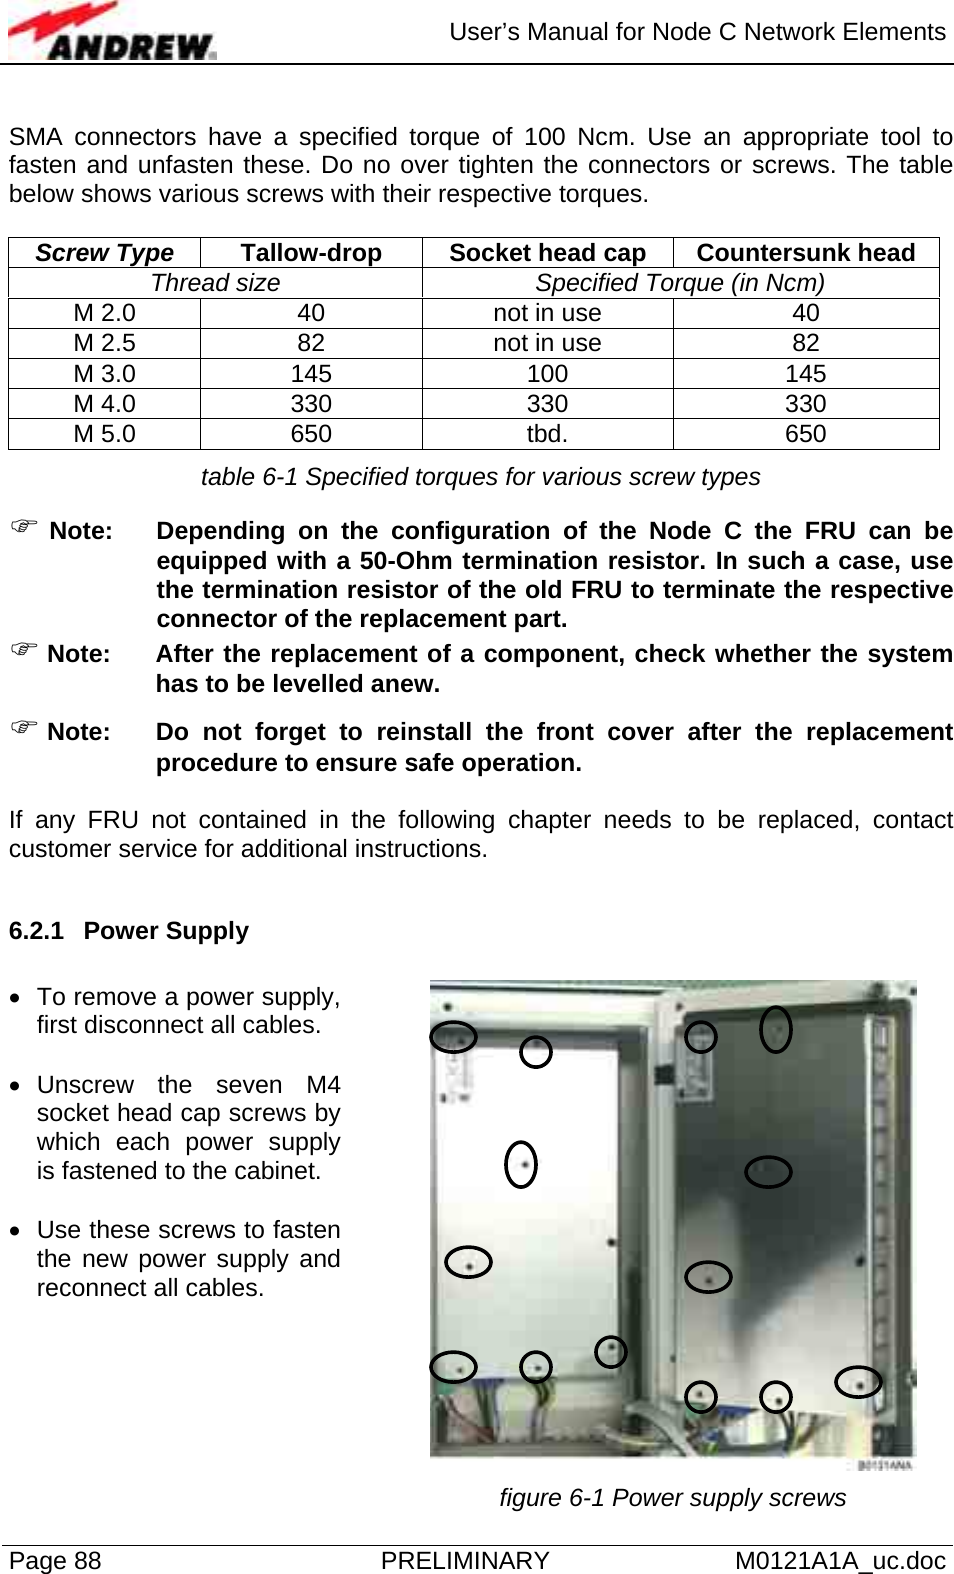  User’s Manual for Node C Network Elements Page 88  PRELIMINARY M0121A1A_uc.doc  SMA connectors have a specified torque of 100 Ncm. Use an appropriate tool to fasten and unfasten these. Do no over tighten the connectors or screws. The table below shows various screws with their respective torques.  Screw Type  Tallow-drop  Socket head cap  Countersunk head Thread size  Specified Torque (in Ncm) M 2.0  40  not in use  40 M 2.5  82  not in use  82 M 3.0  145  100  145 M 4.0  330  330  330 M 5.0  650  tbd.  650 table 6-1 Specified torques for various screw types ) Note:  Depending on the configuration of the Node C the FRU can be equipped with a 50-Ohm termination resistor. In such a case, use the termination resistor of the old FRU to terminate the respective connector of the replacement part. ) Note:  After the replacement of a component, check whether the system has to be levelled anew. ) Note: Do not forget to reinstall the front cover after the replacement procedure to ensure safe operation.   If any FRU not contained in the following chapter needs to be replaced, contact customer service for additional instructions.  6.2.1 Power Supply  •  To remove a power supply, first disconnect all cables.  • Unscrew the seven M4 socket head cap screws by which each power supply is fastened to the cabinet.  •  Use these screws to fasten the new power supply and reconnect all cables.     figure 6-1 Power supply screws 